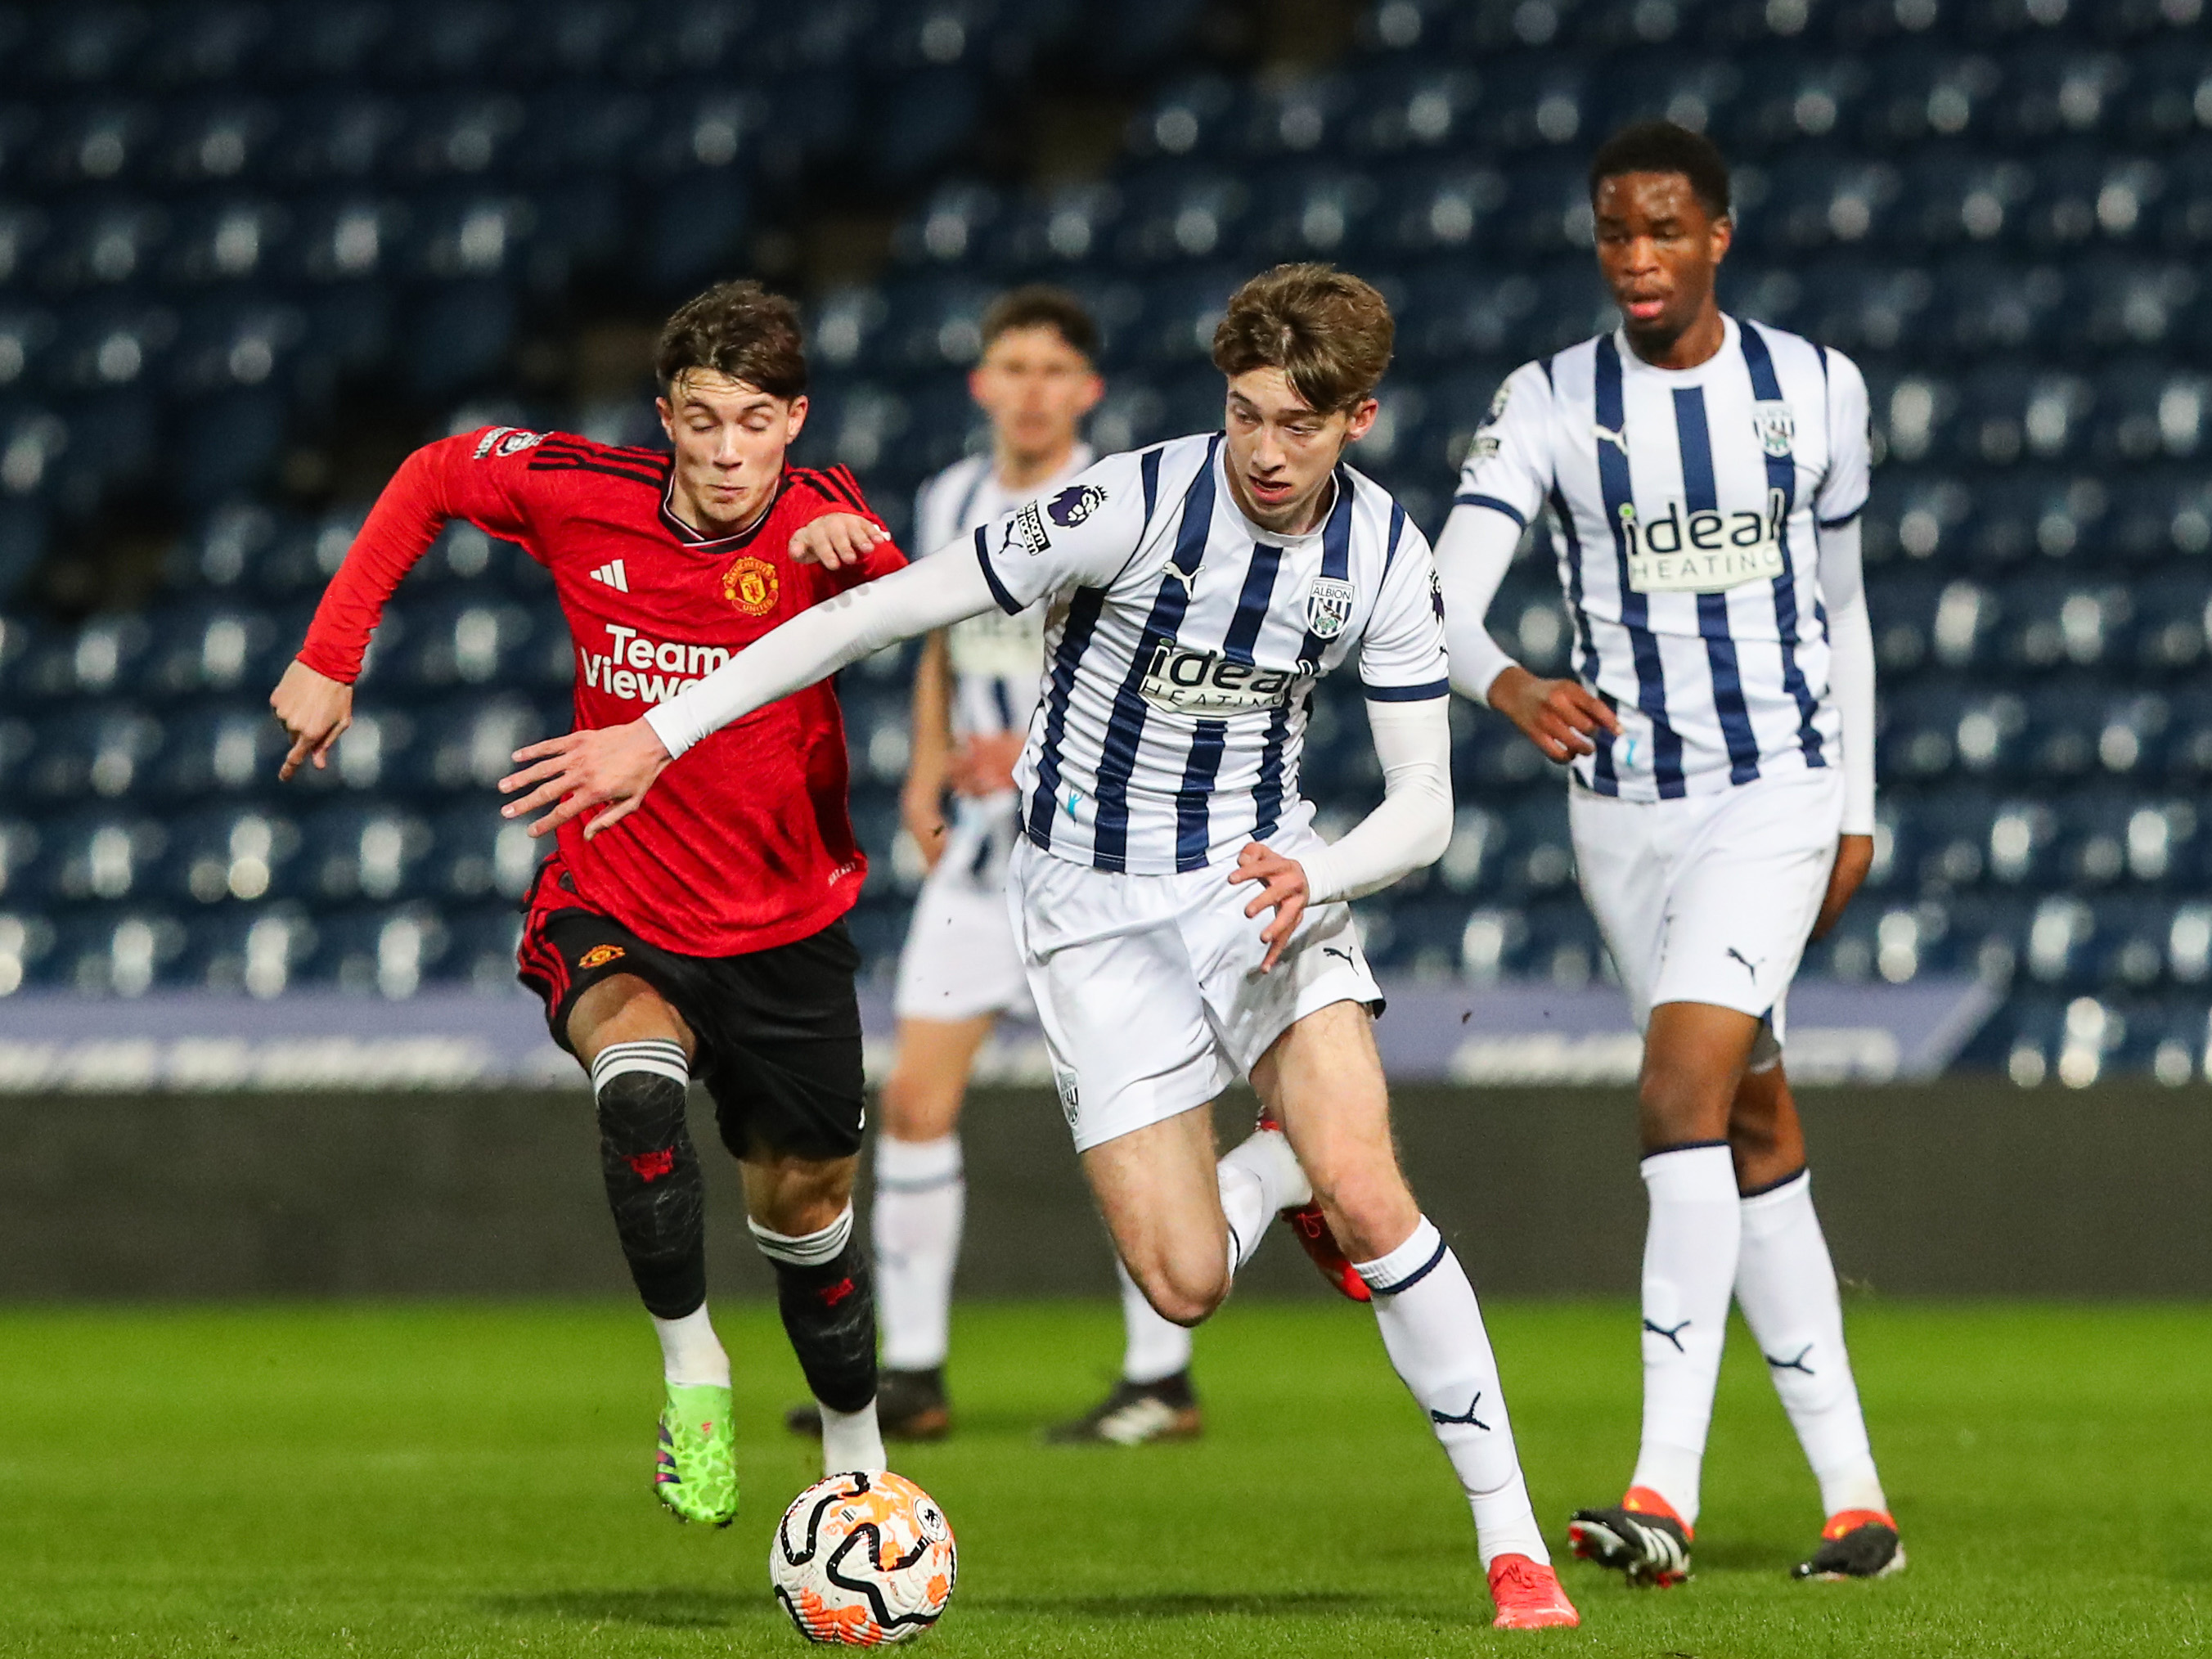 Harry Whitwell battles for the ball with a Manchester United player during the PL2 clash at The Hawthorns